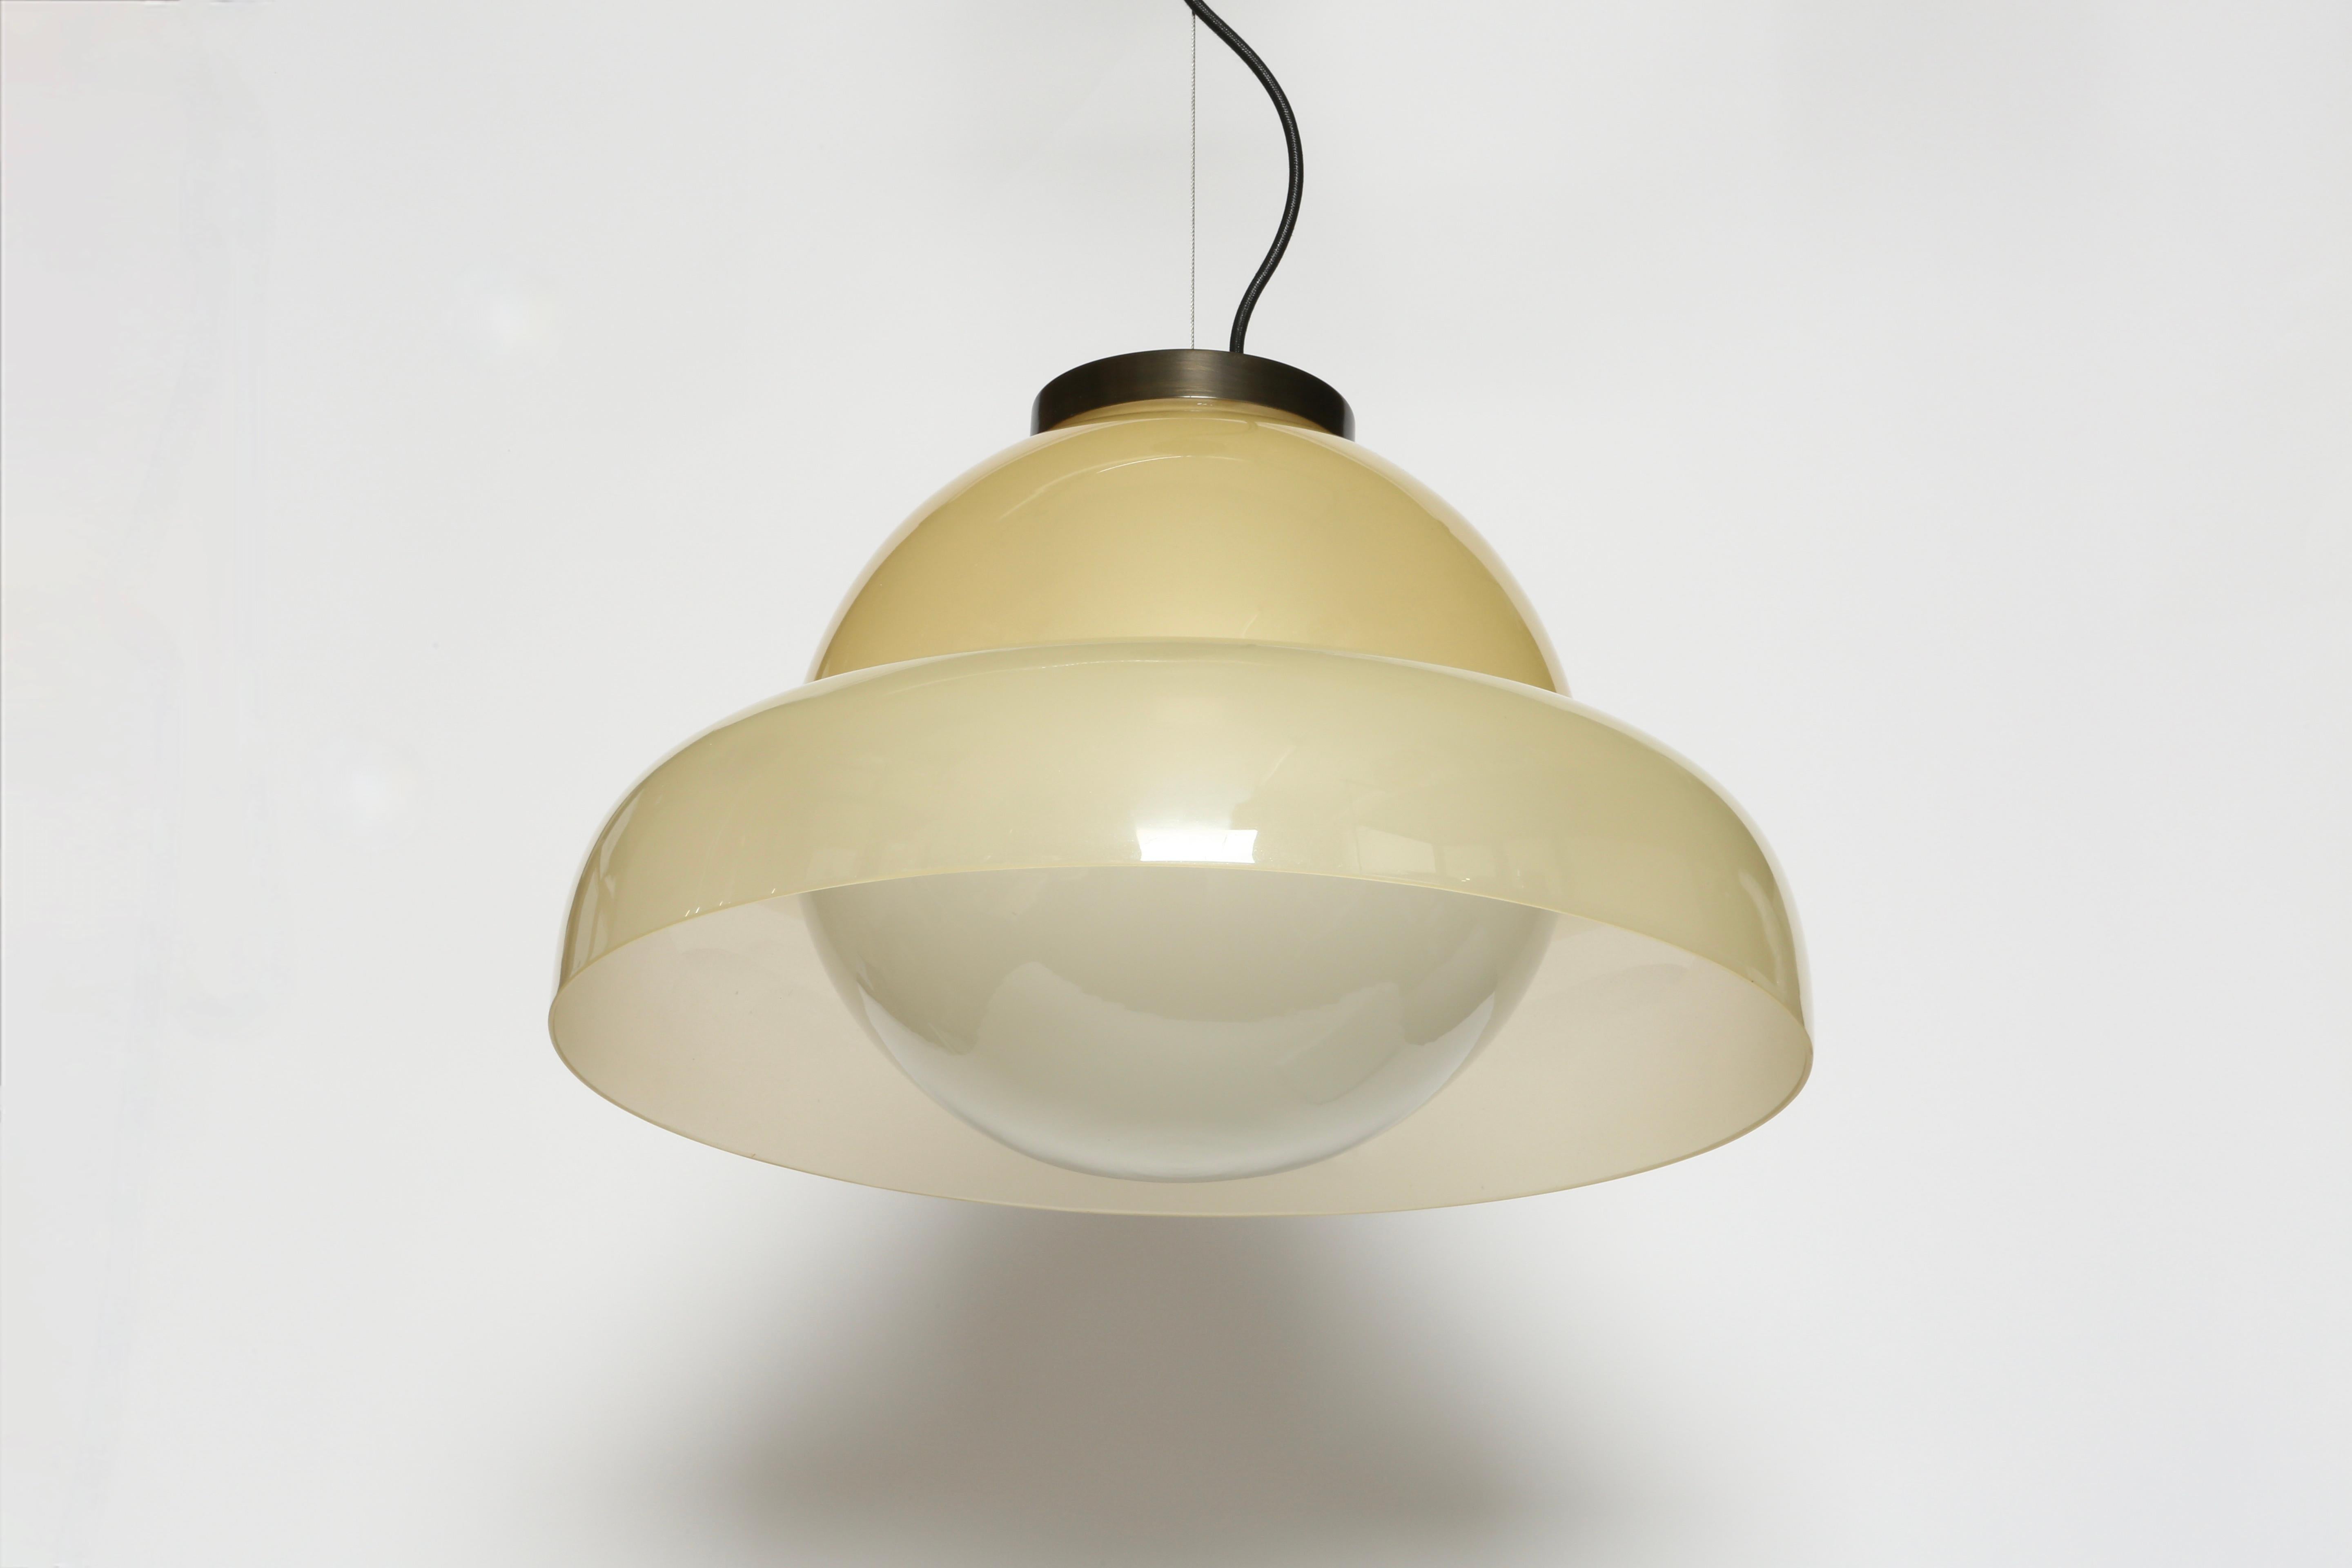 Murano Ceiling Pendant by Vistosi, Large In Good Condition For Sale In Brooklyn, NY